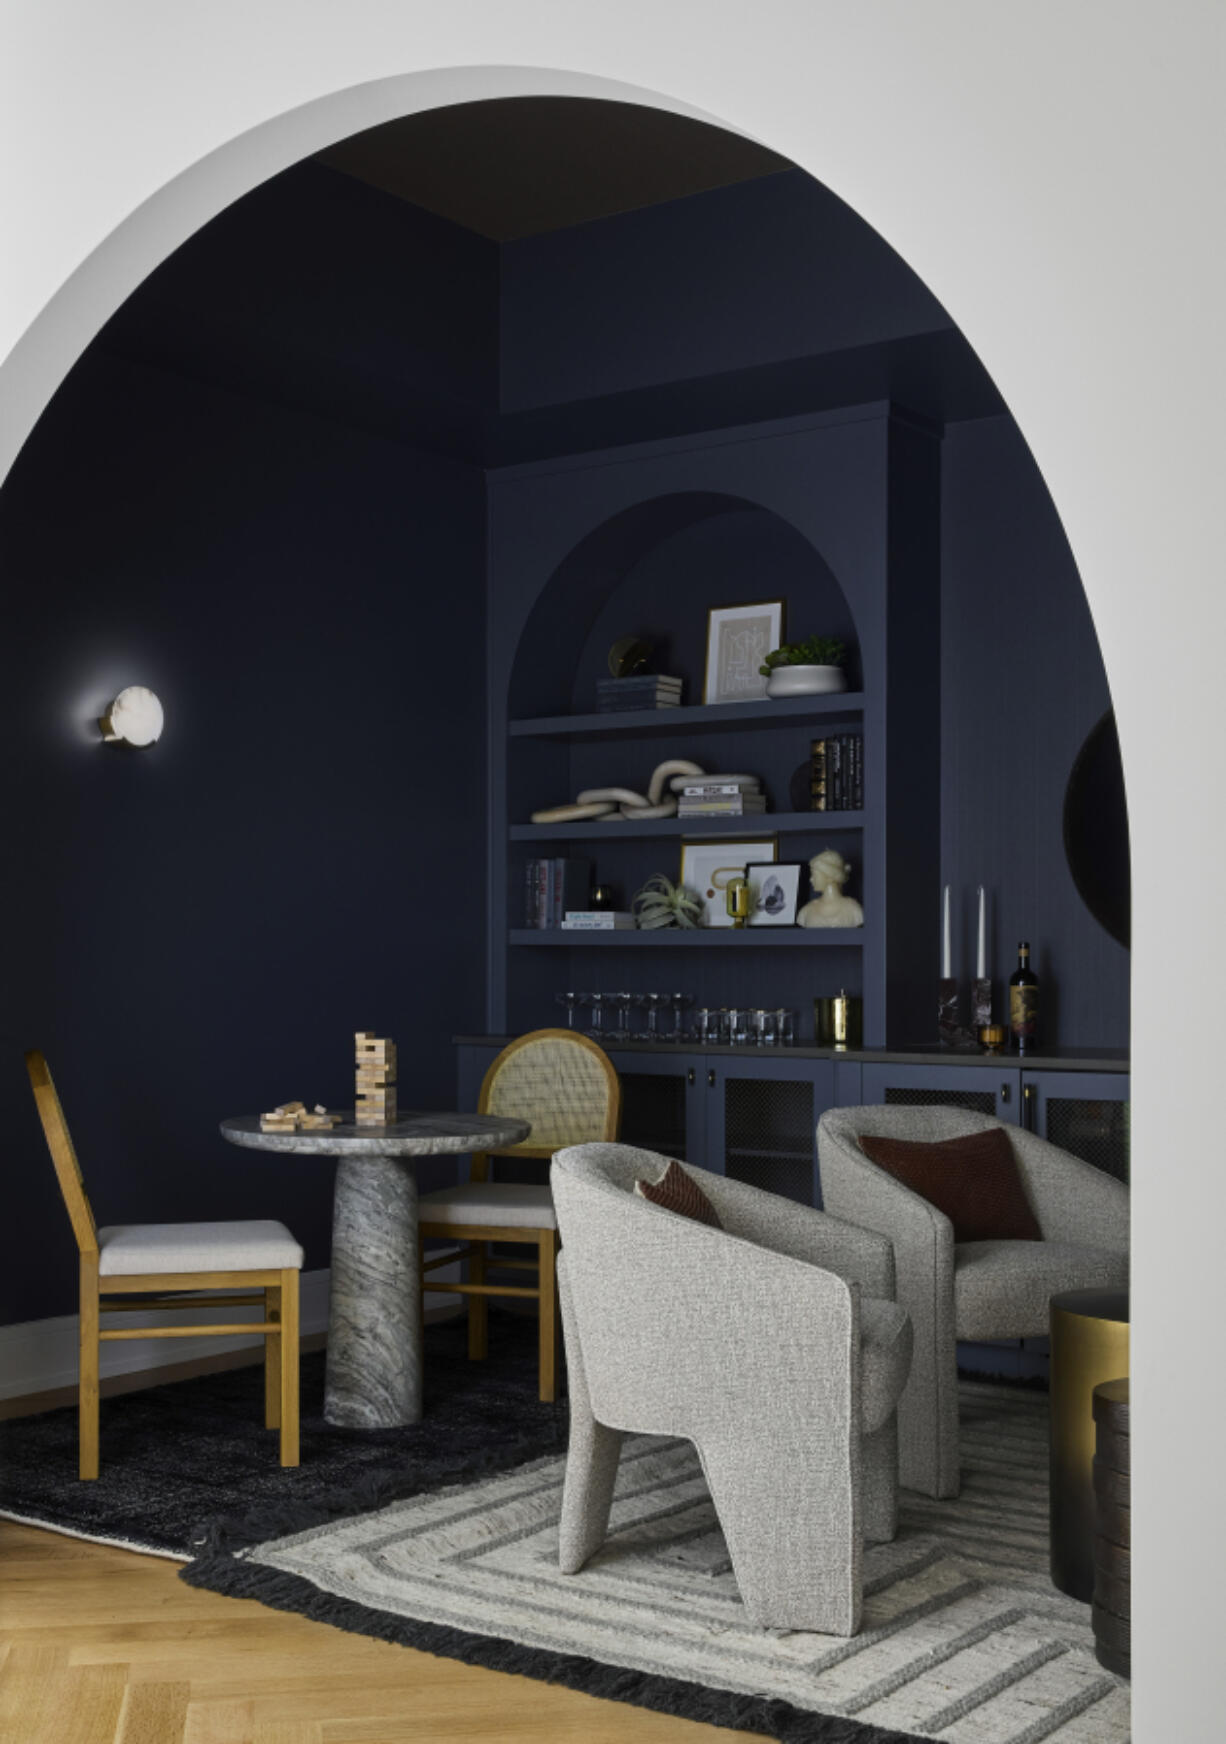 In a modern boho home located in New Buffalo Michigan, DGI created a cool cozy alcove; the inky blue hue accentuates the curved ceiling and intimate space.